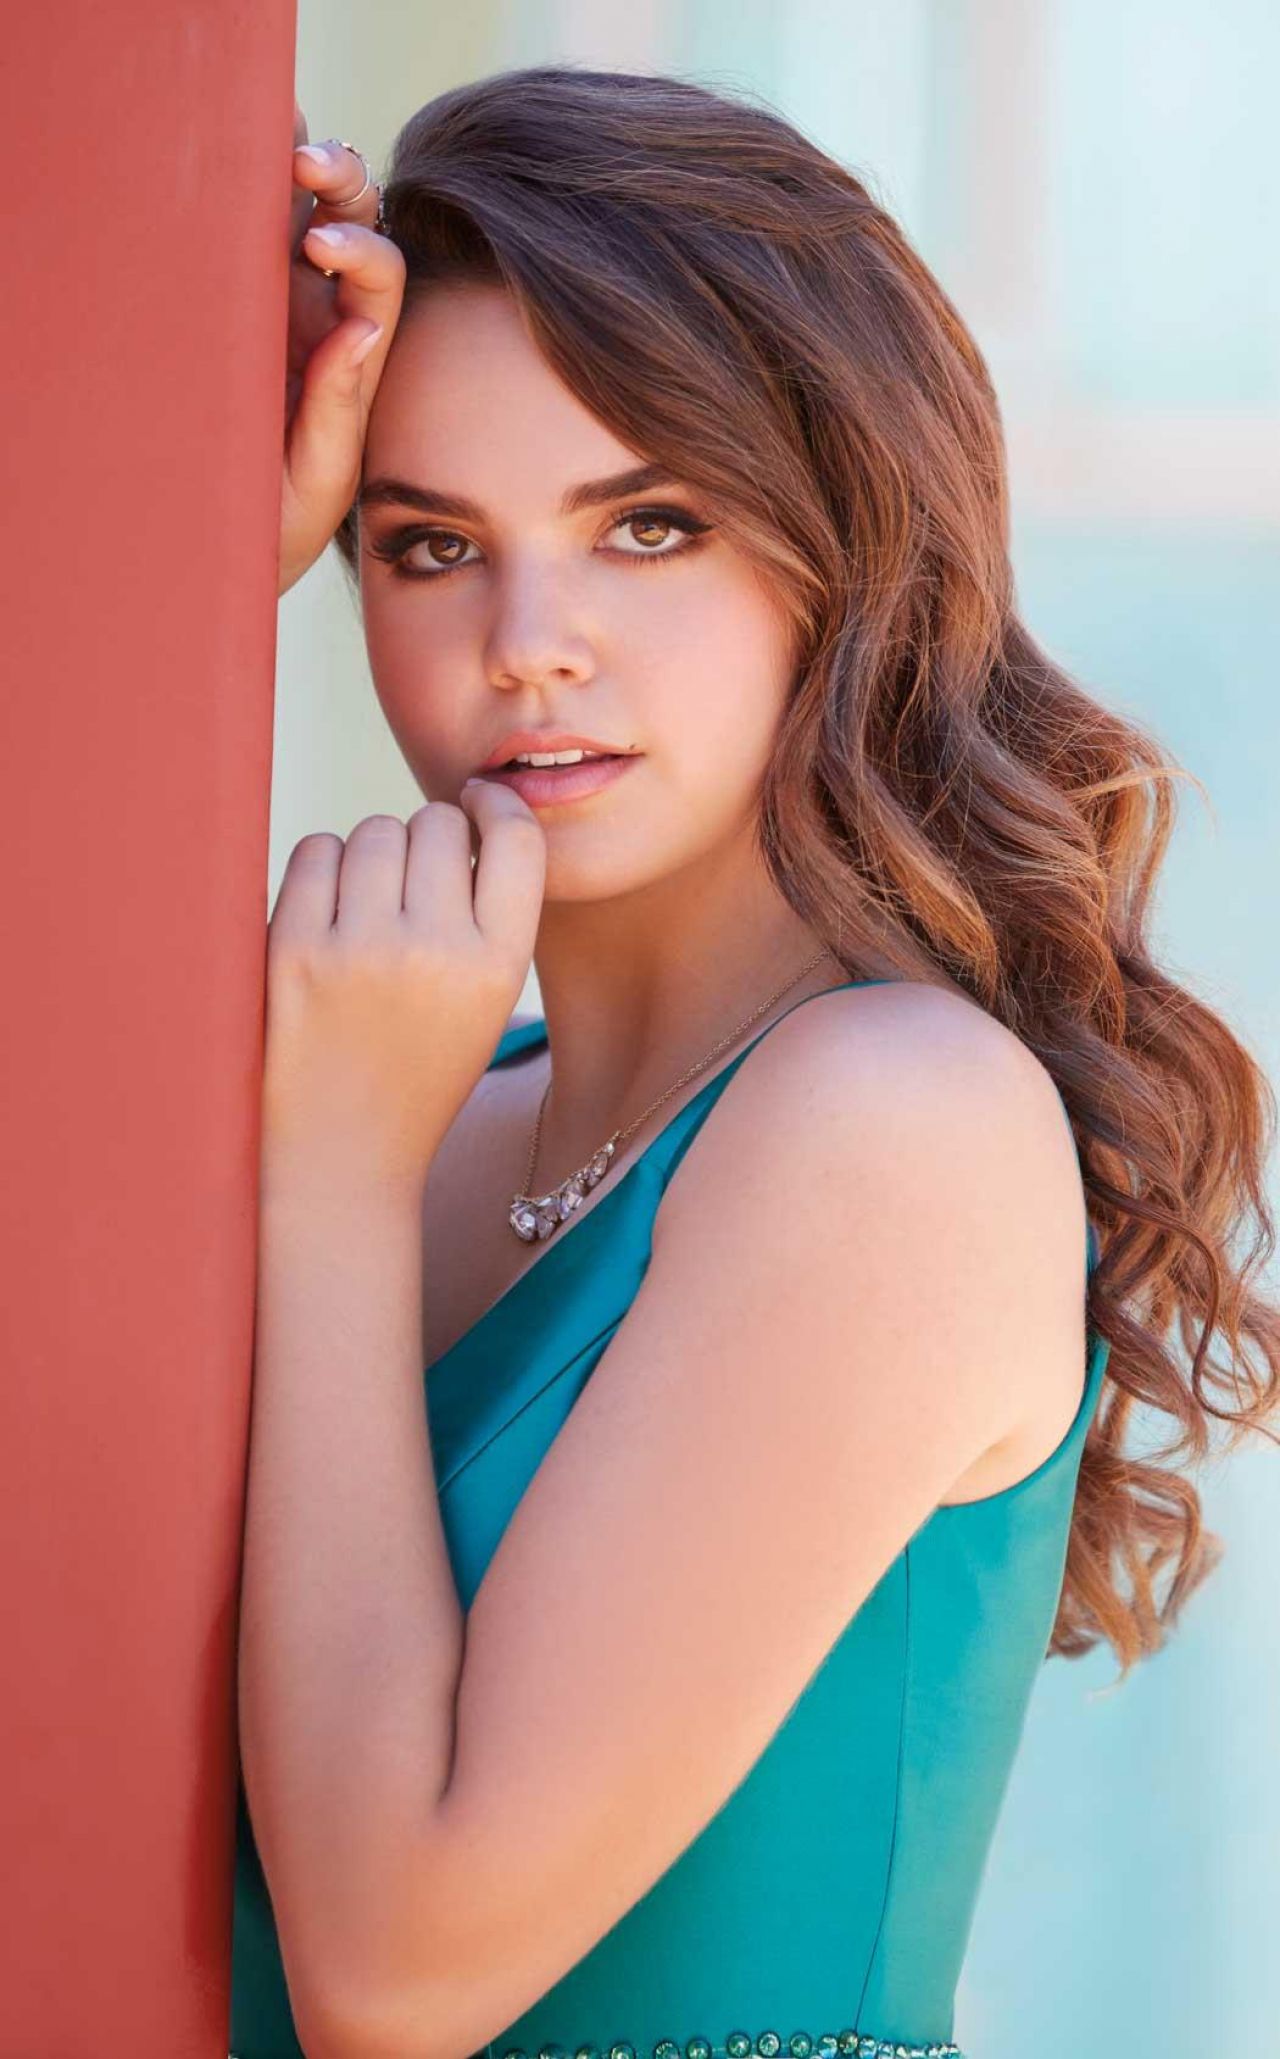 http://www.theplace.ru/archive/bailee_madison/img/11(60).jpg